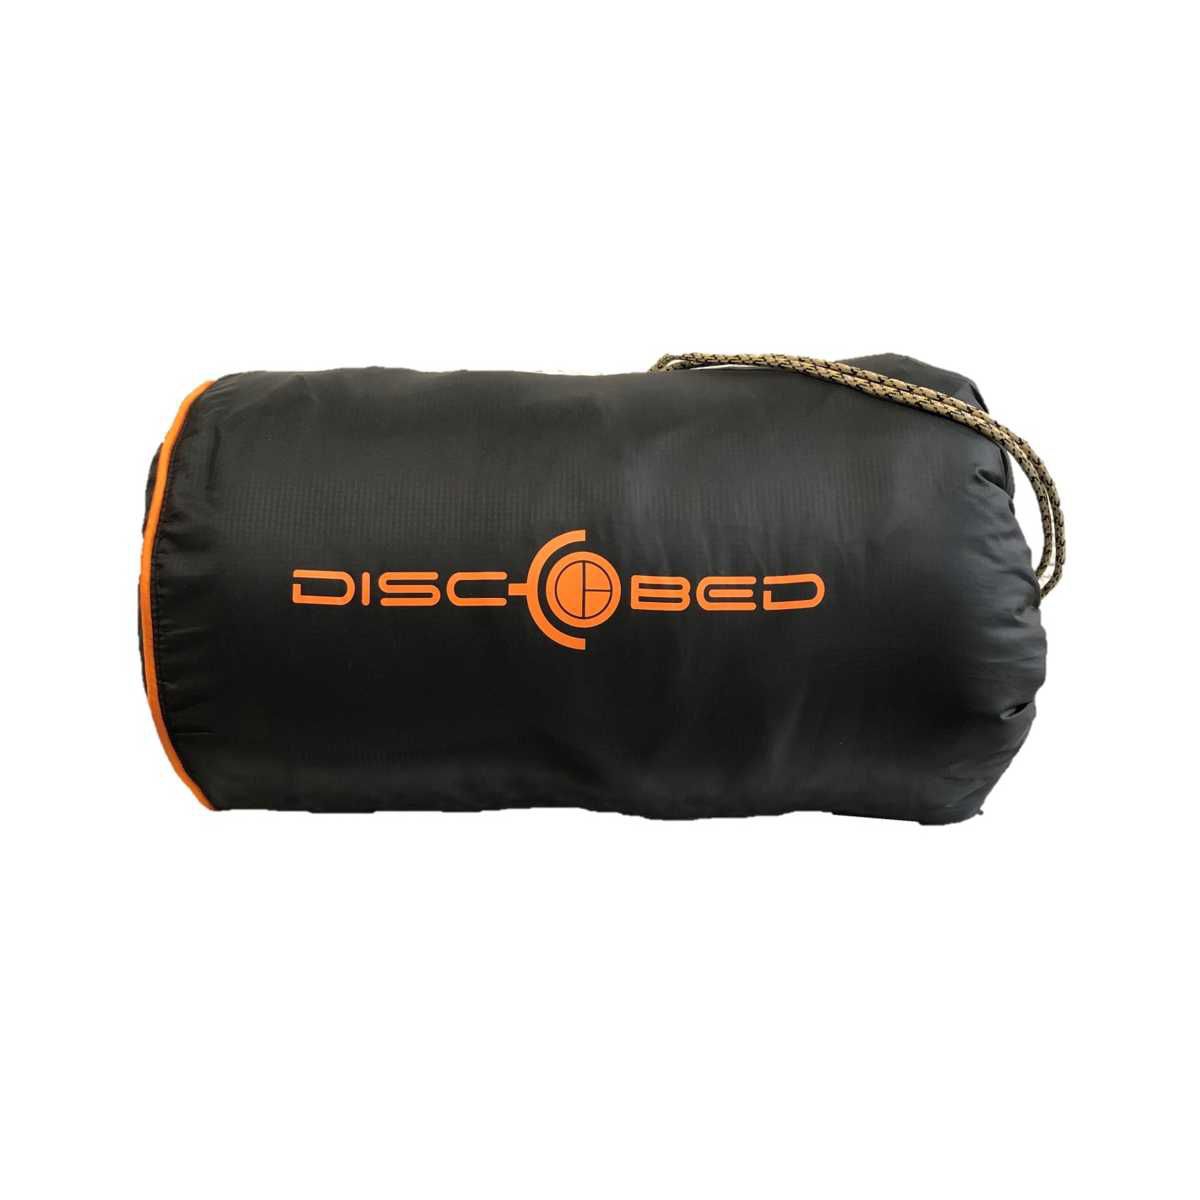 Disc-O-Bed Multifunktions-Outdoordecke All in One- schwarz  - 50009